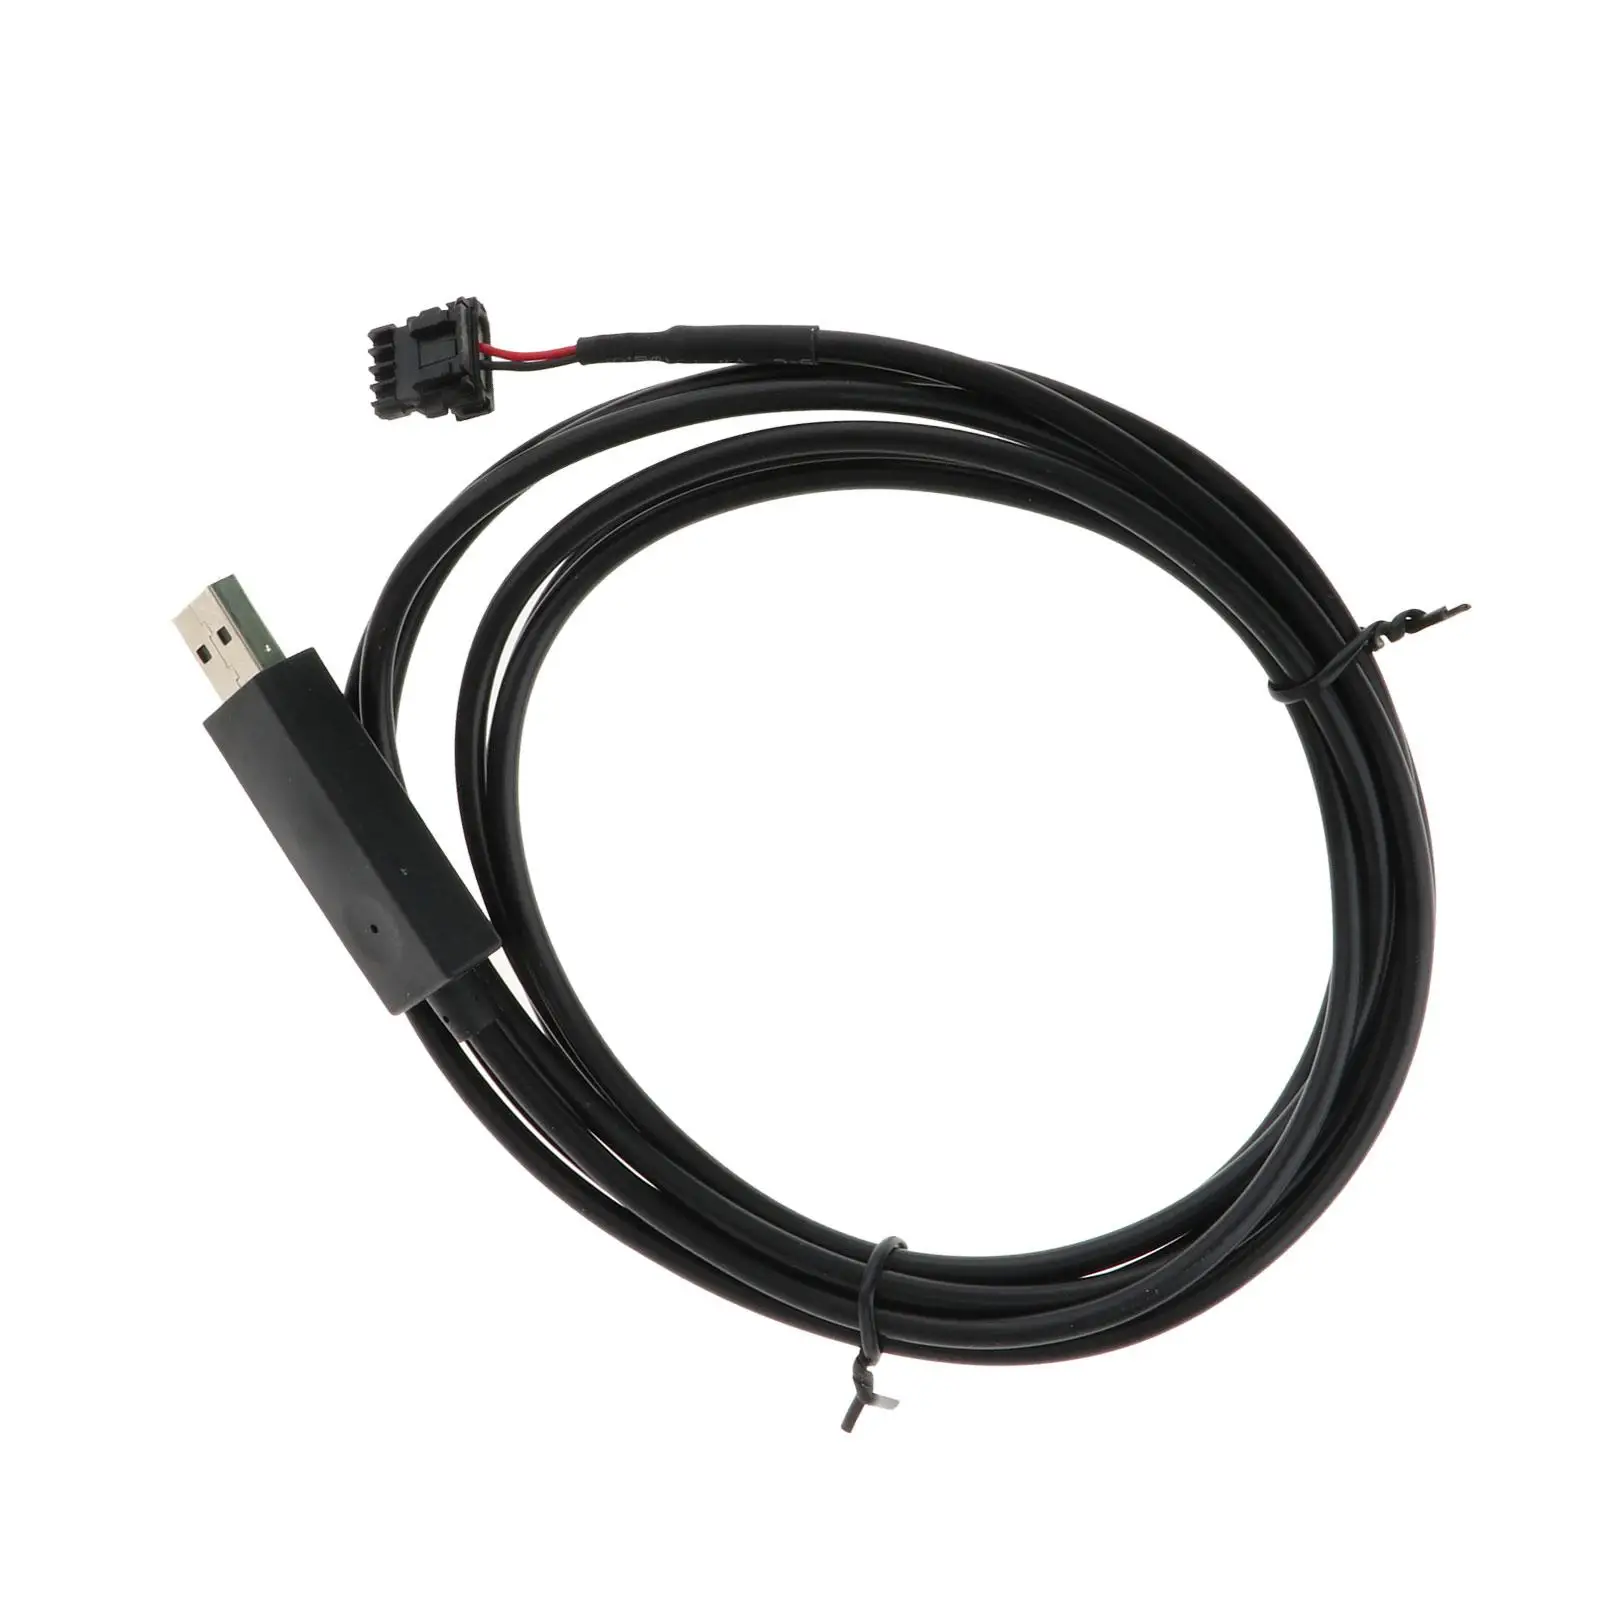 USB Can Communication Cable 558-443 Replacement Part Durable Cable Connector with Built in Splitter for Holley Sniper Efi